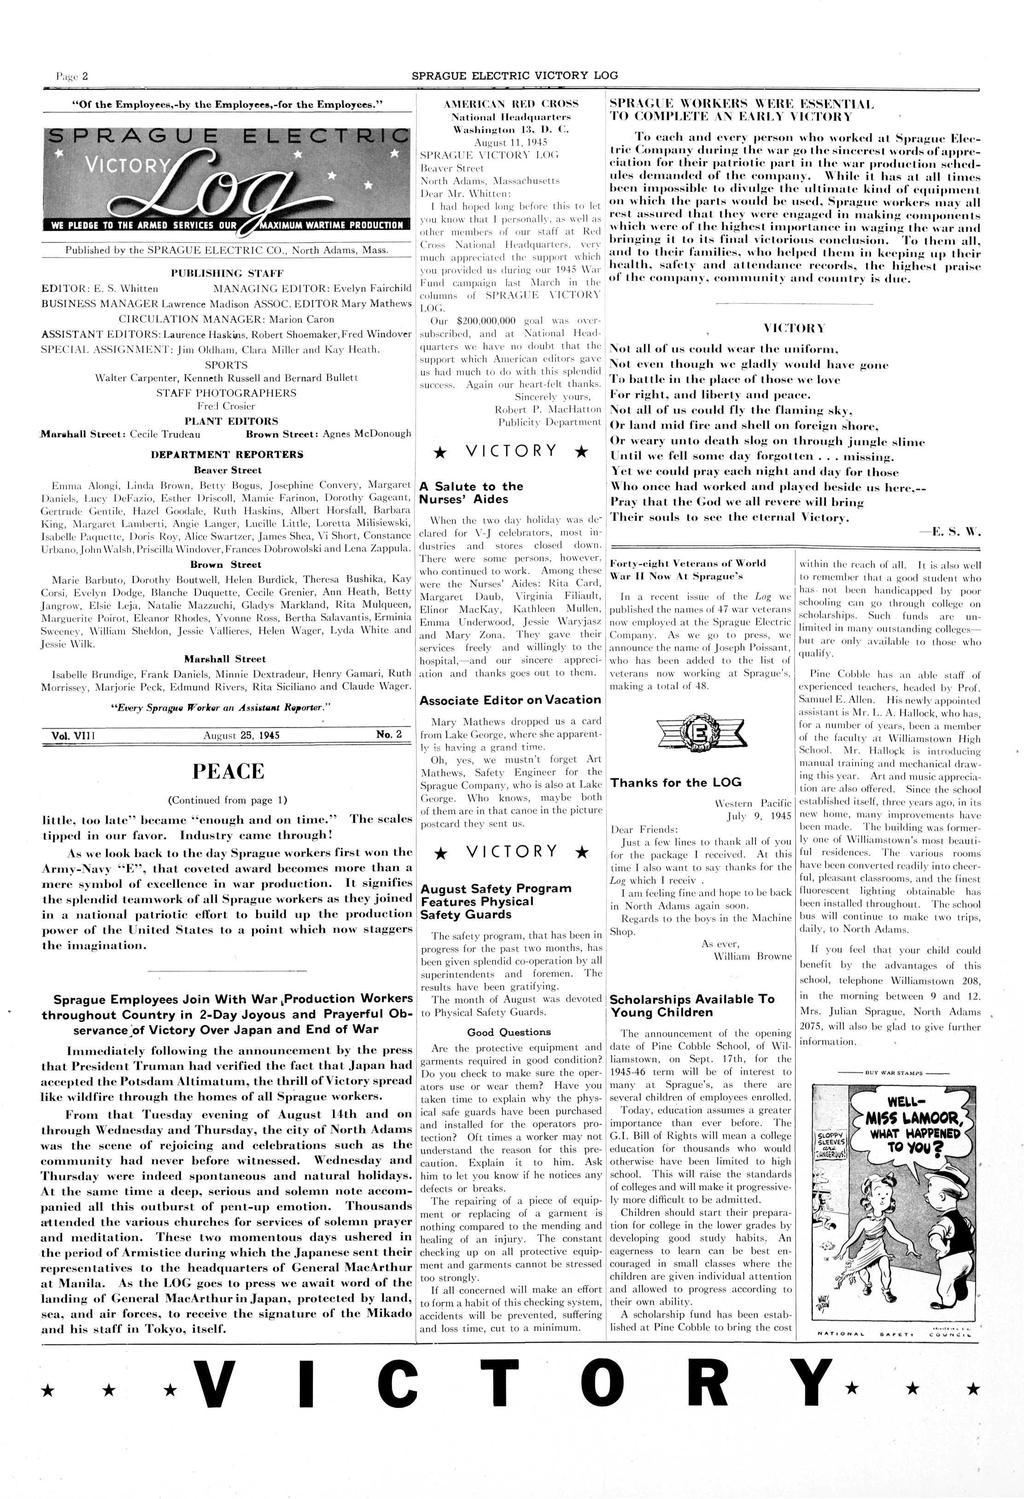 Pge 2 "Of the Employees,-by the Employees,-for the Employees." RAG UE ELECTRIC Published by the SPRAGUE ELECTRIC CO., North Adms, Mss. PUBLISHING STAFF EDITOR: E. S. Whitten MANAGING EDITOR: Evelyn Firchild BUSINESS MANAGER Lwrence Mdison ASSOC.